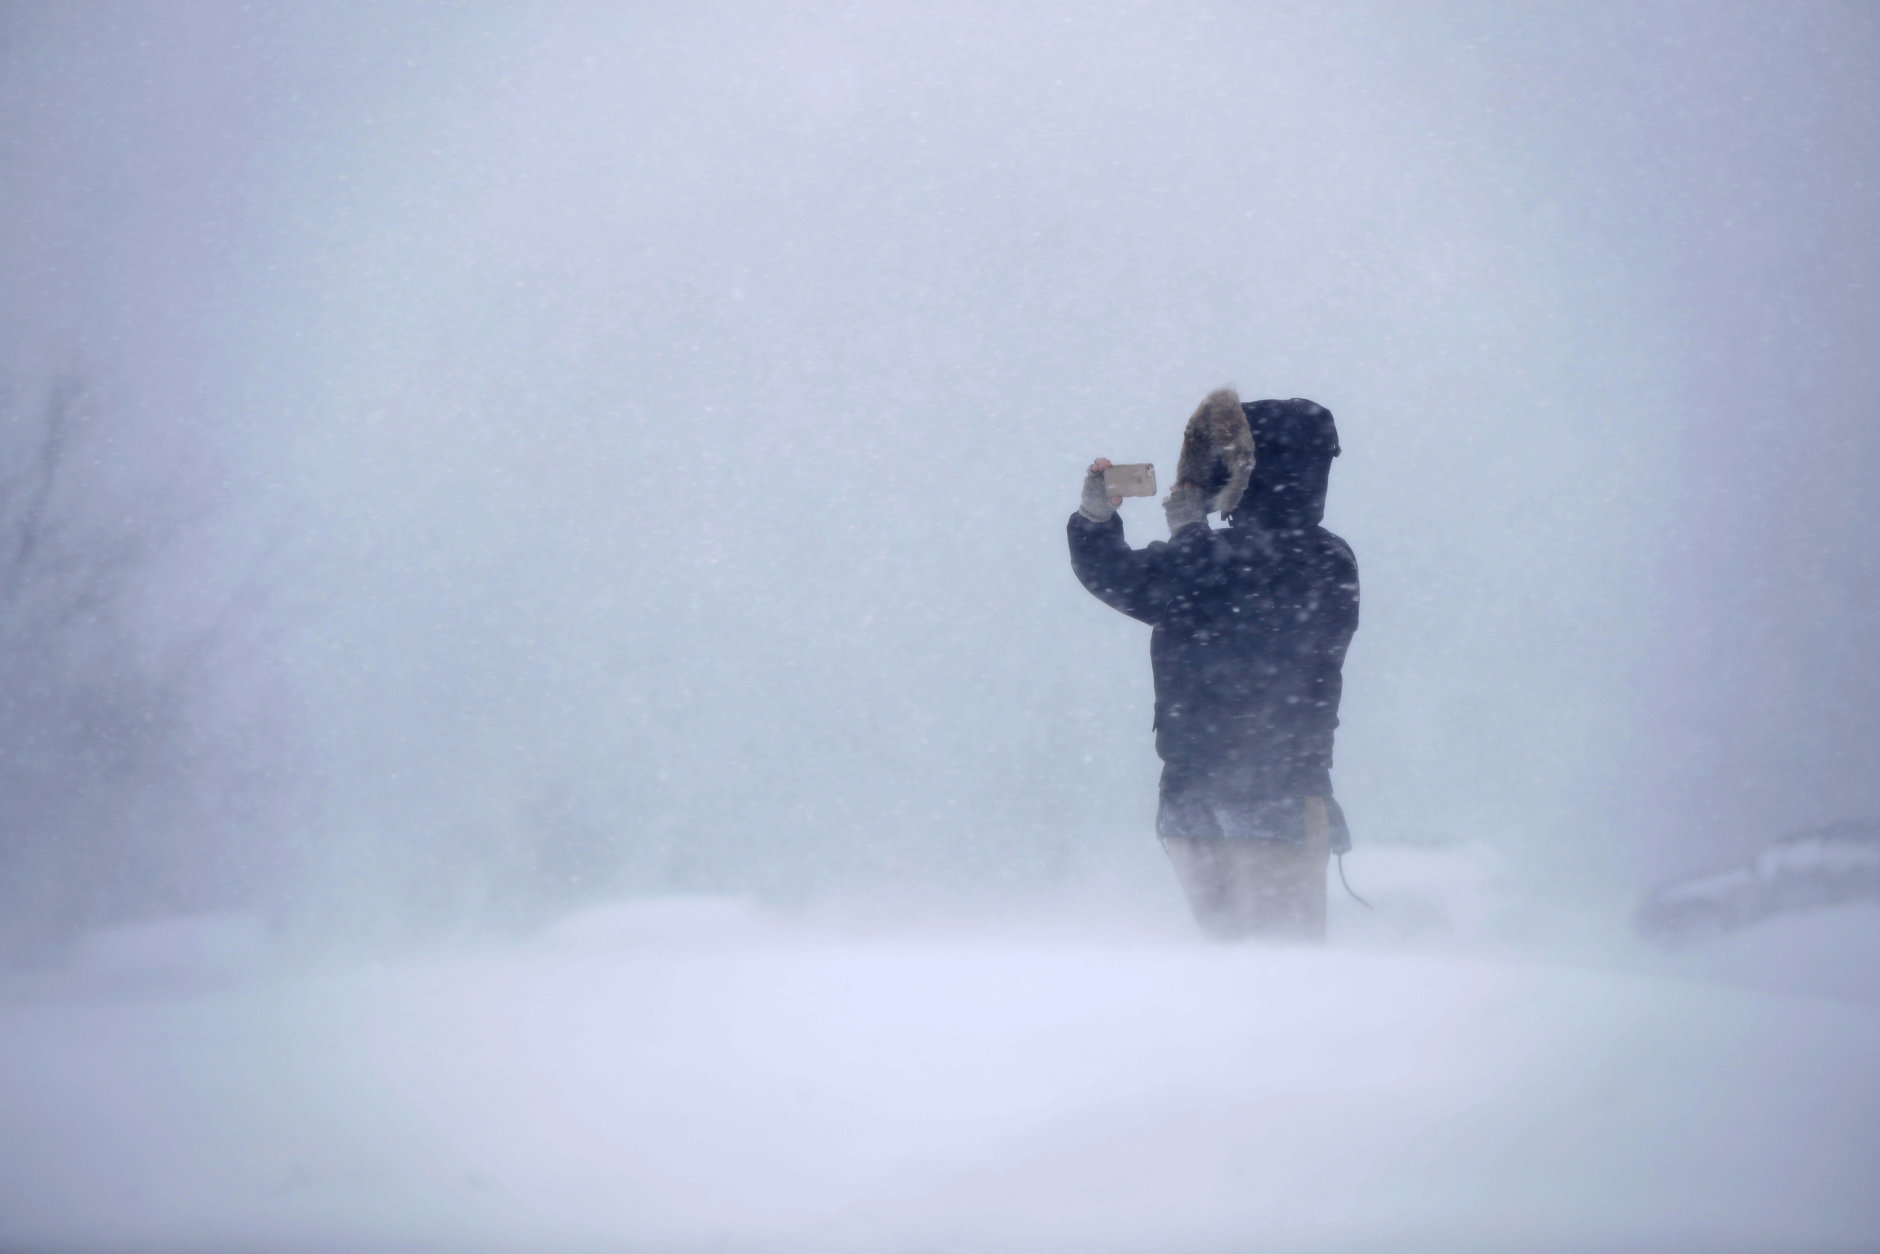 Cassie Peterson uses a phone to record the whiteout conditions during the latest winter storm, Tuesday, March 13, 2018, in Portland, Maine. The third major nor'easter in two weeks slammed the storm-battered Northeast Tuesday with blizzard conditions. (AP Photo/Robert F. Bukaty)